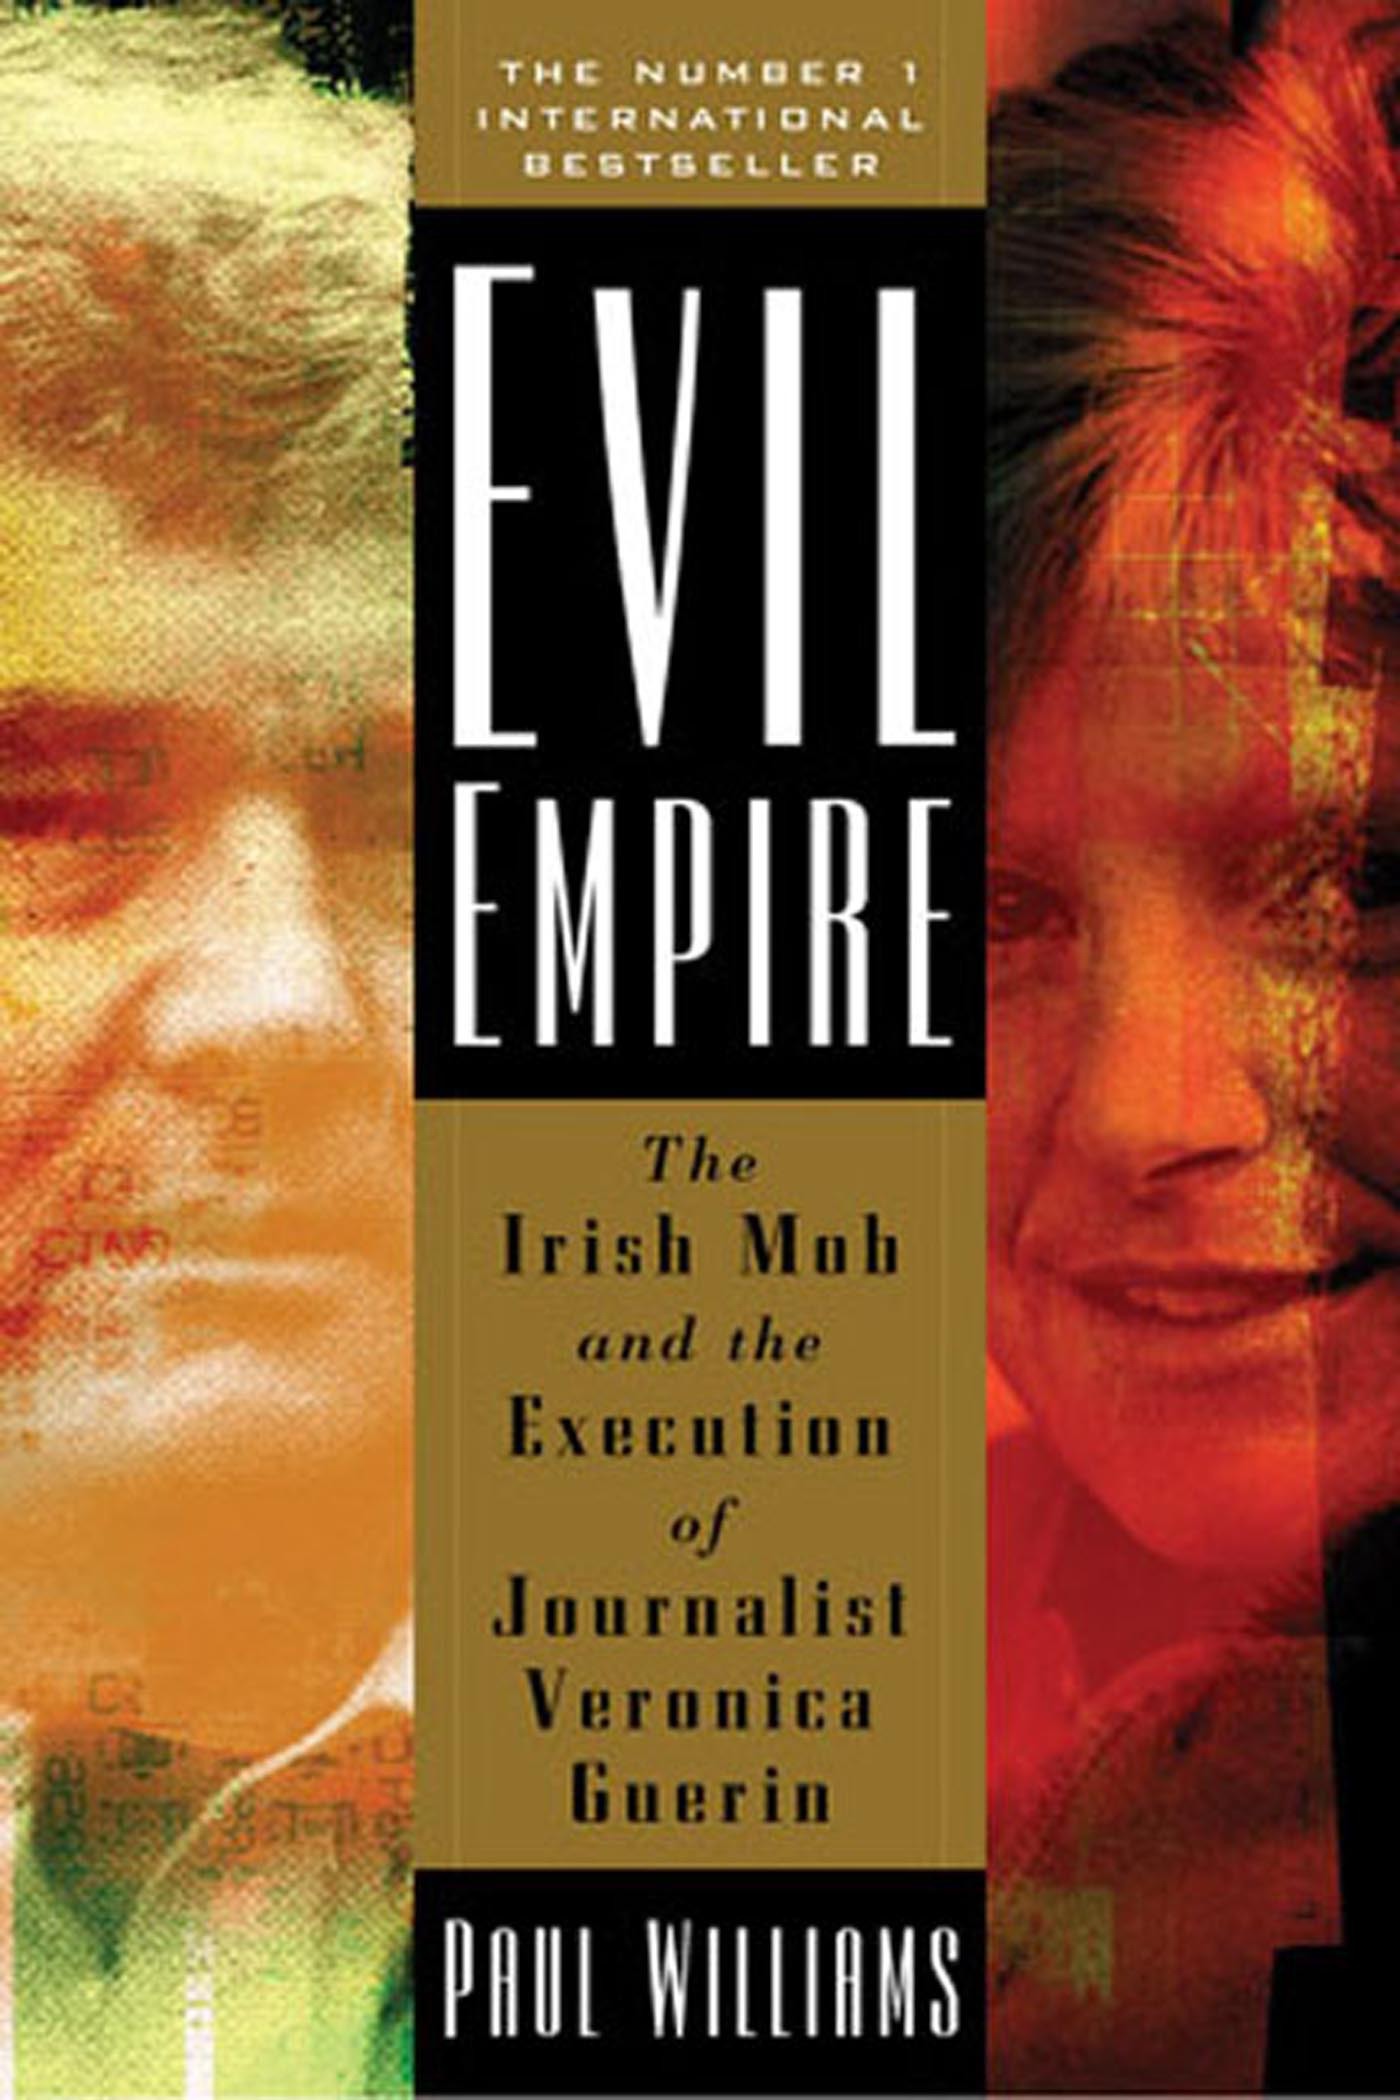 Evil Empire : The Irish Mob and the Assassination of Journalist Veronica Guerin by Paul Williams